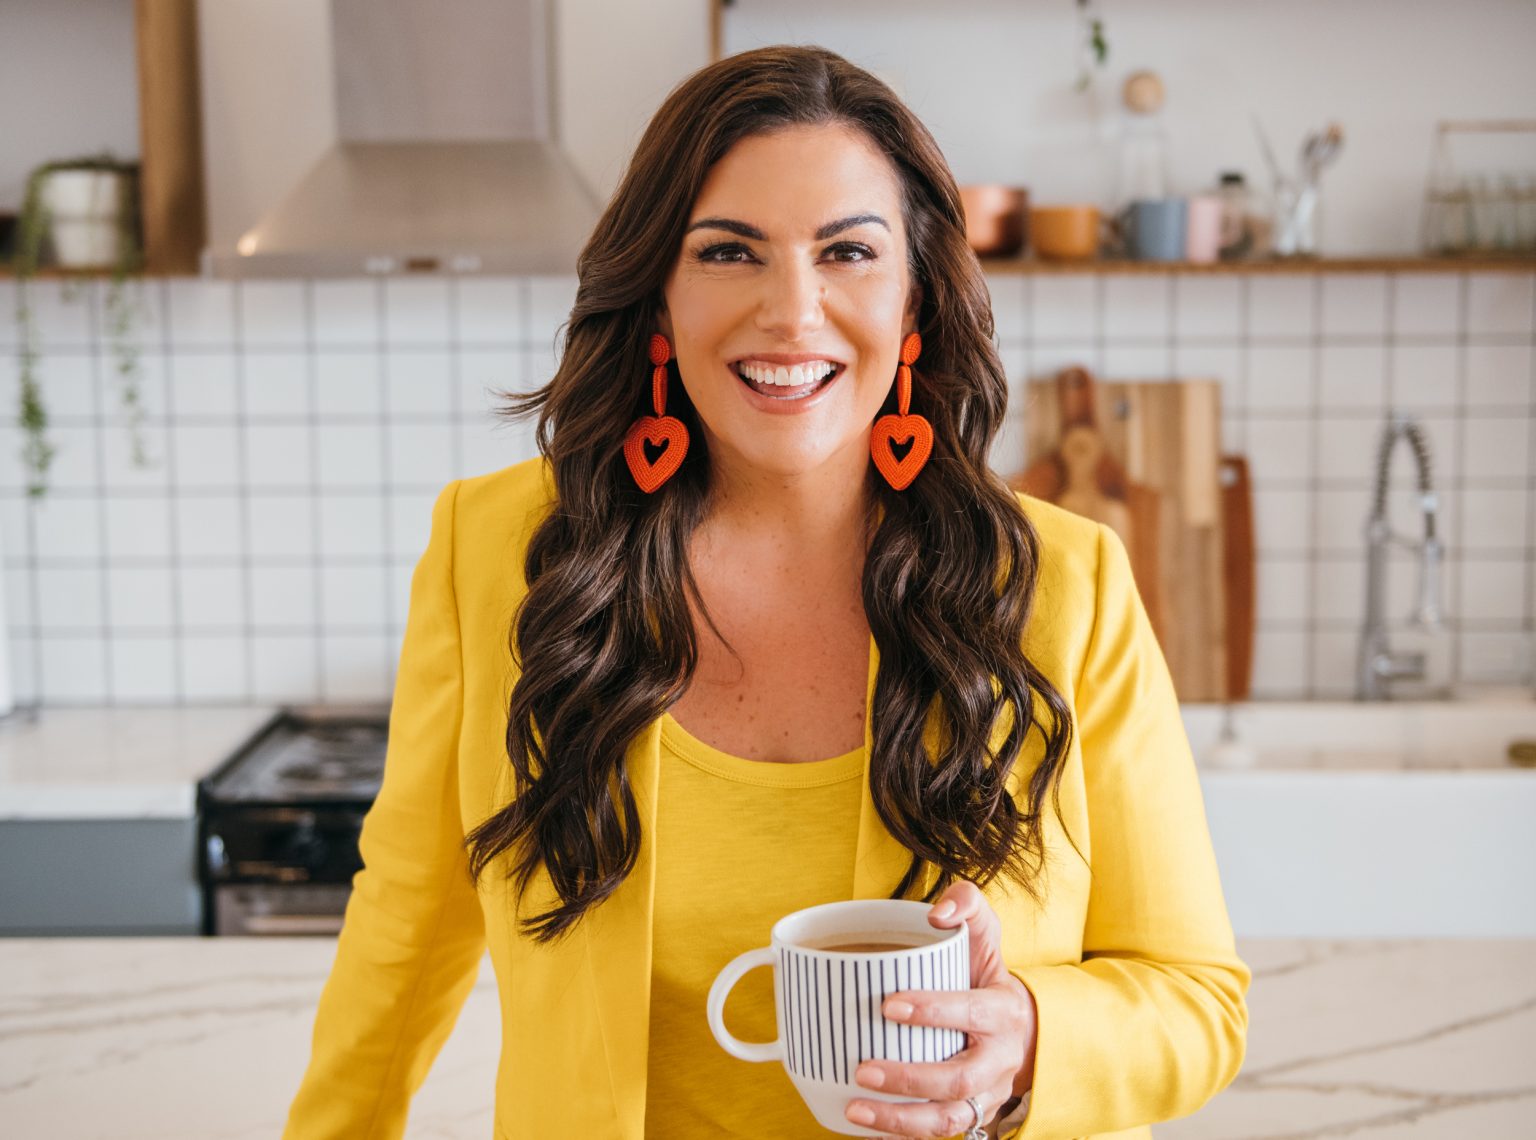 Amy Porterfield Making Being a Mom (And Online Marketing) Look Easy